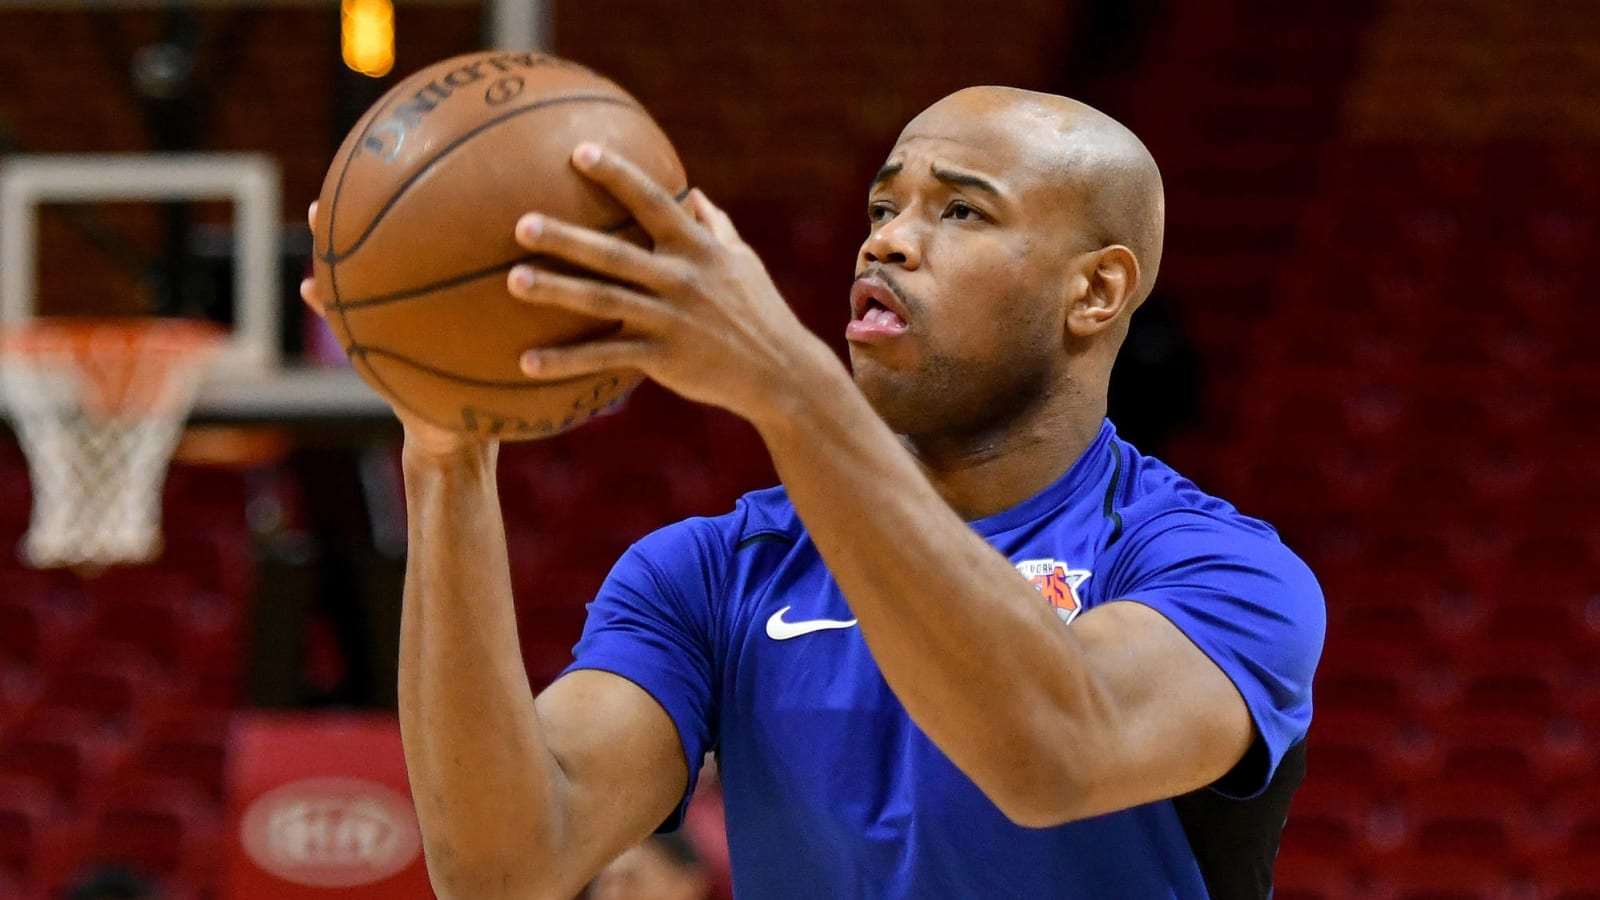 Former first-round pick Jarrett Jack signs with G League Ignite